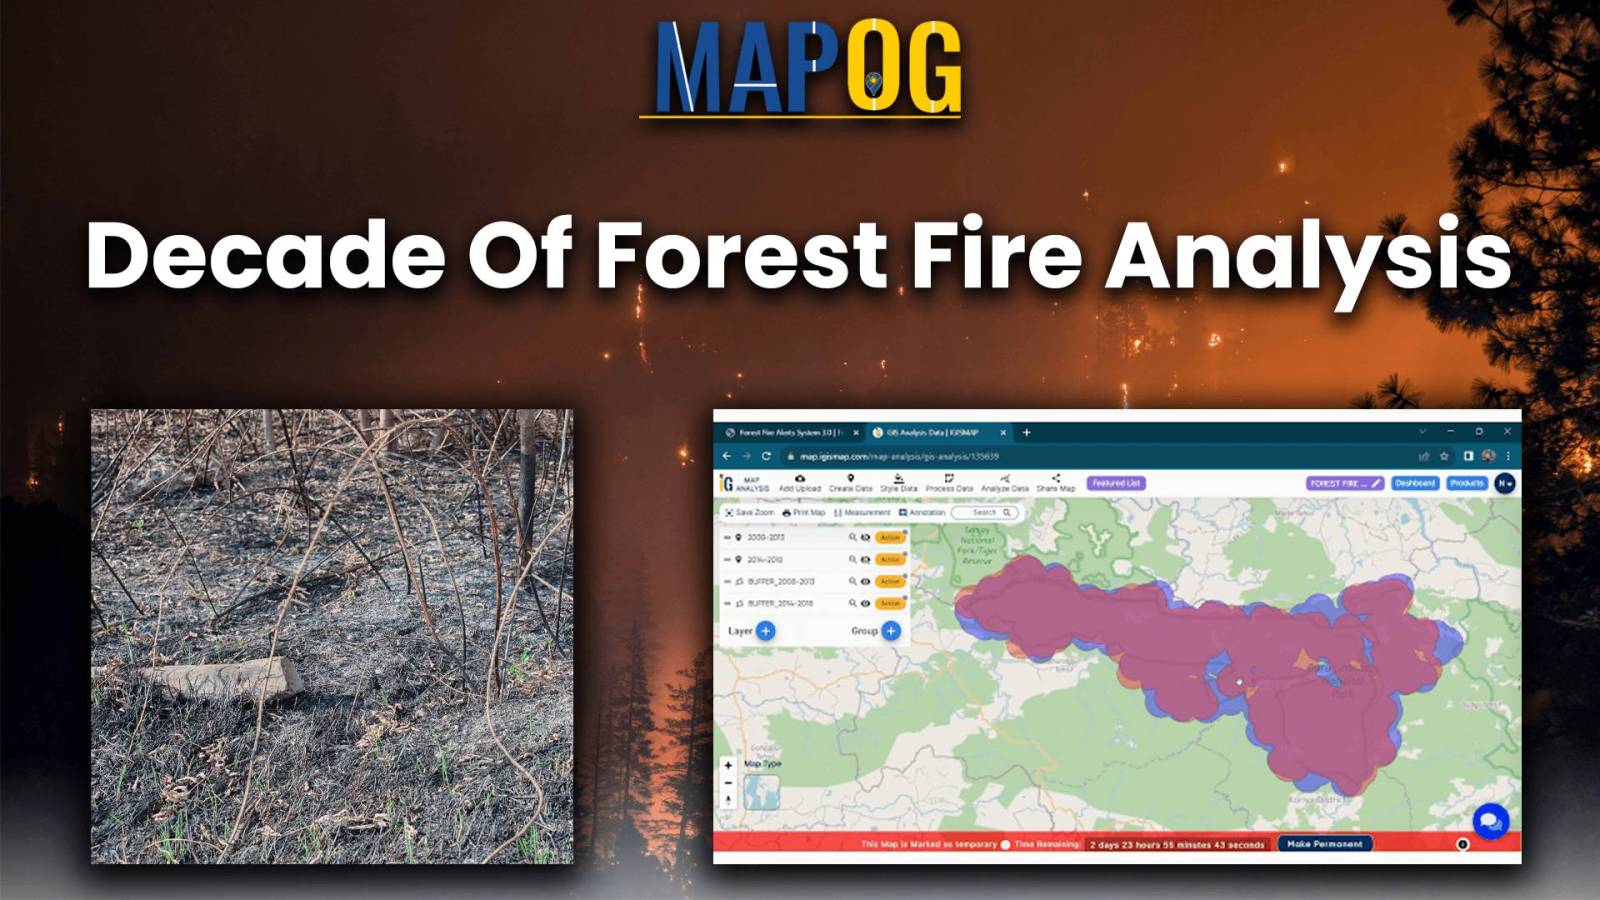 Decade of forest fire analysis